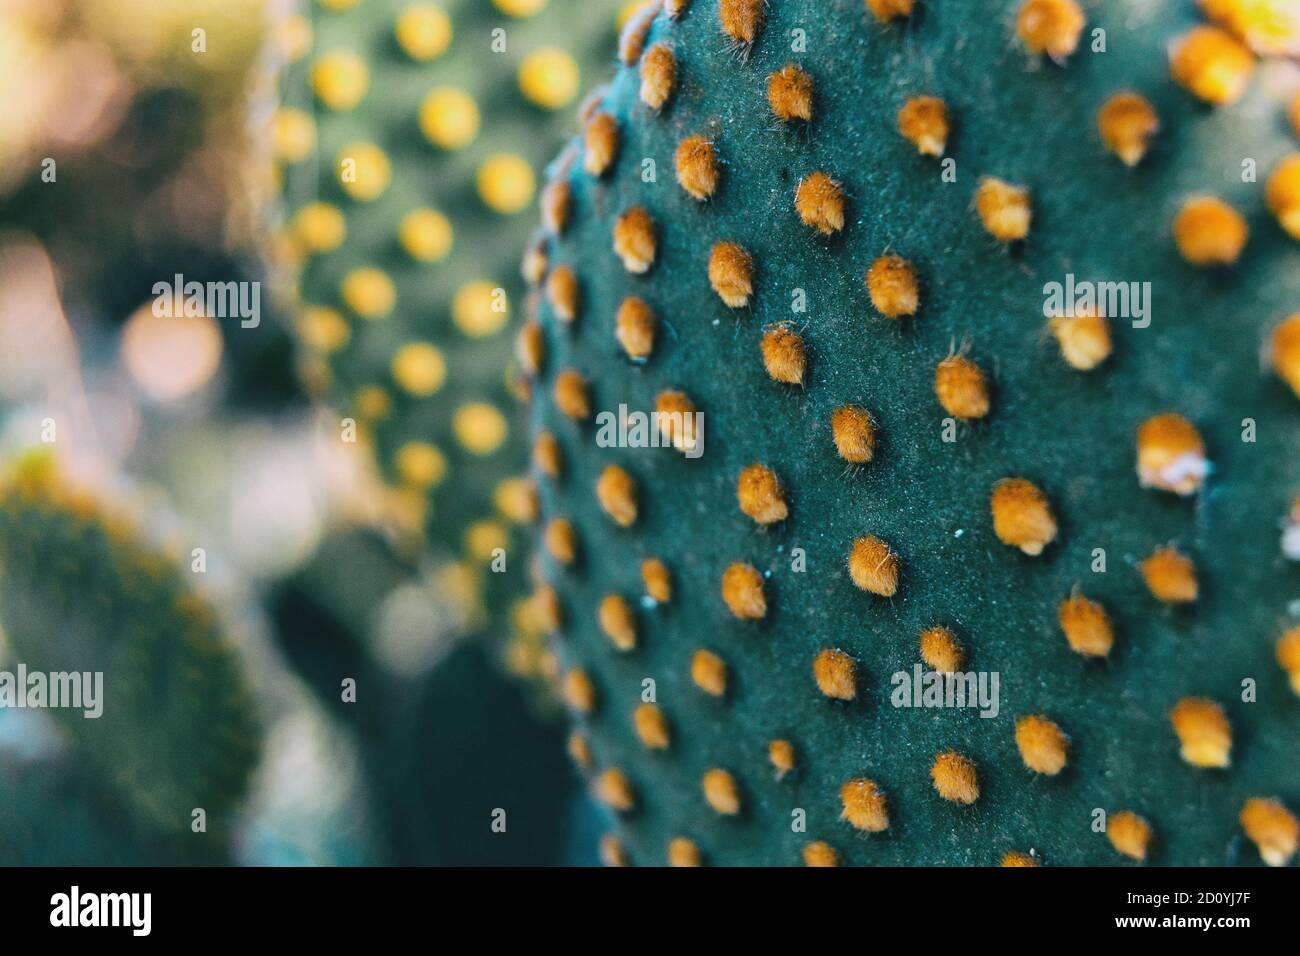 Detail of the pattern formed by the yellow glochids of an opuntia microdasys cactus plant Stock Photo